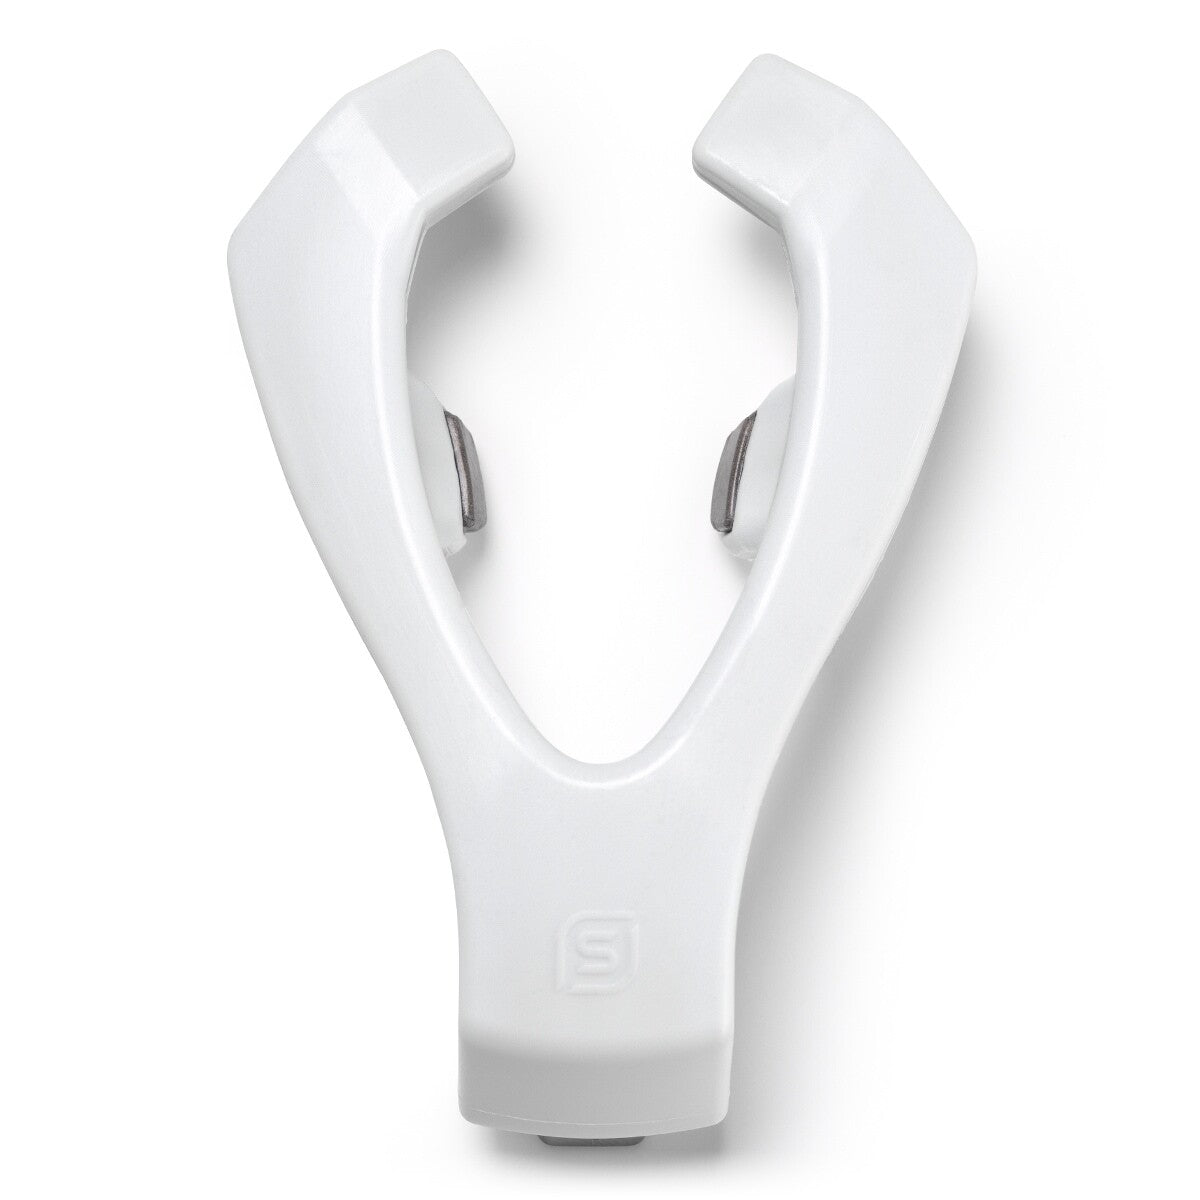 Replacement Mouthpiece for eXciteOSA Daytime Therapy Device